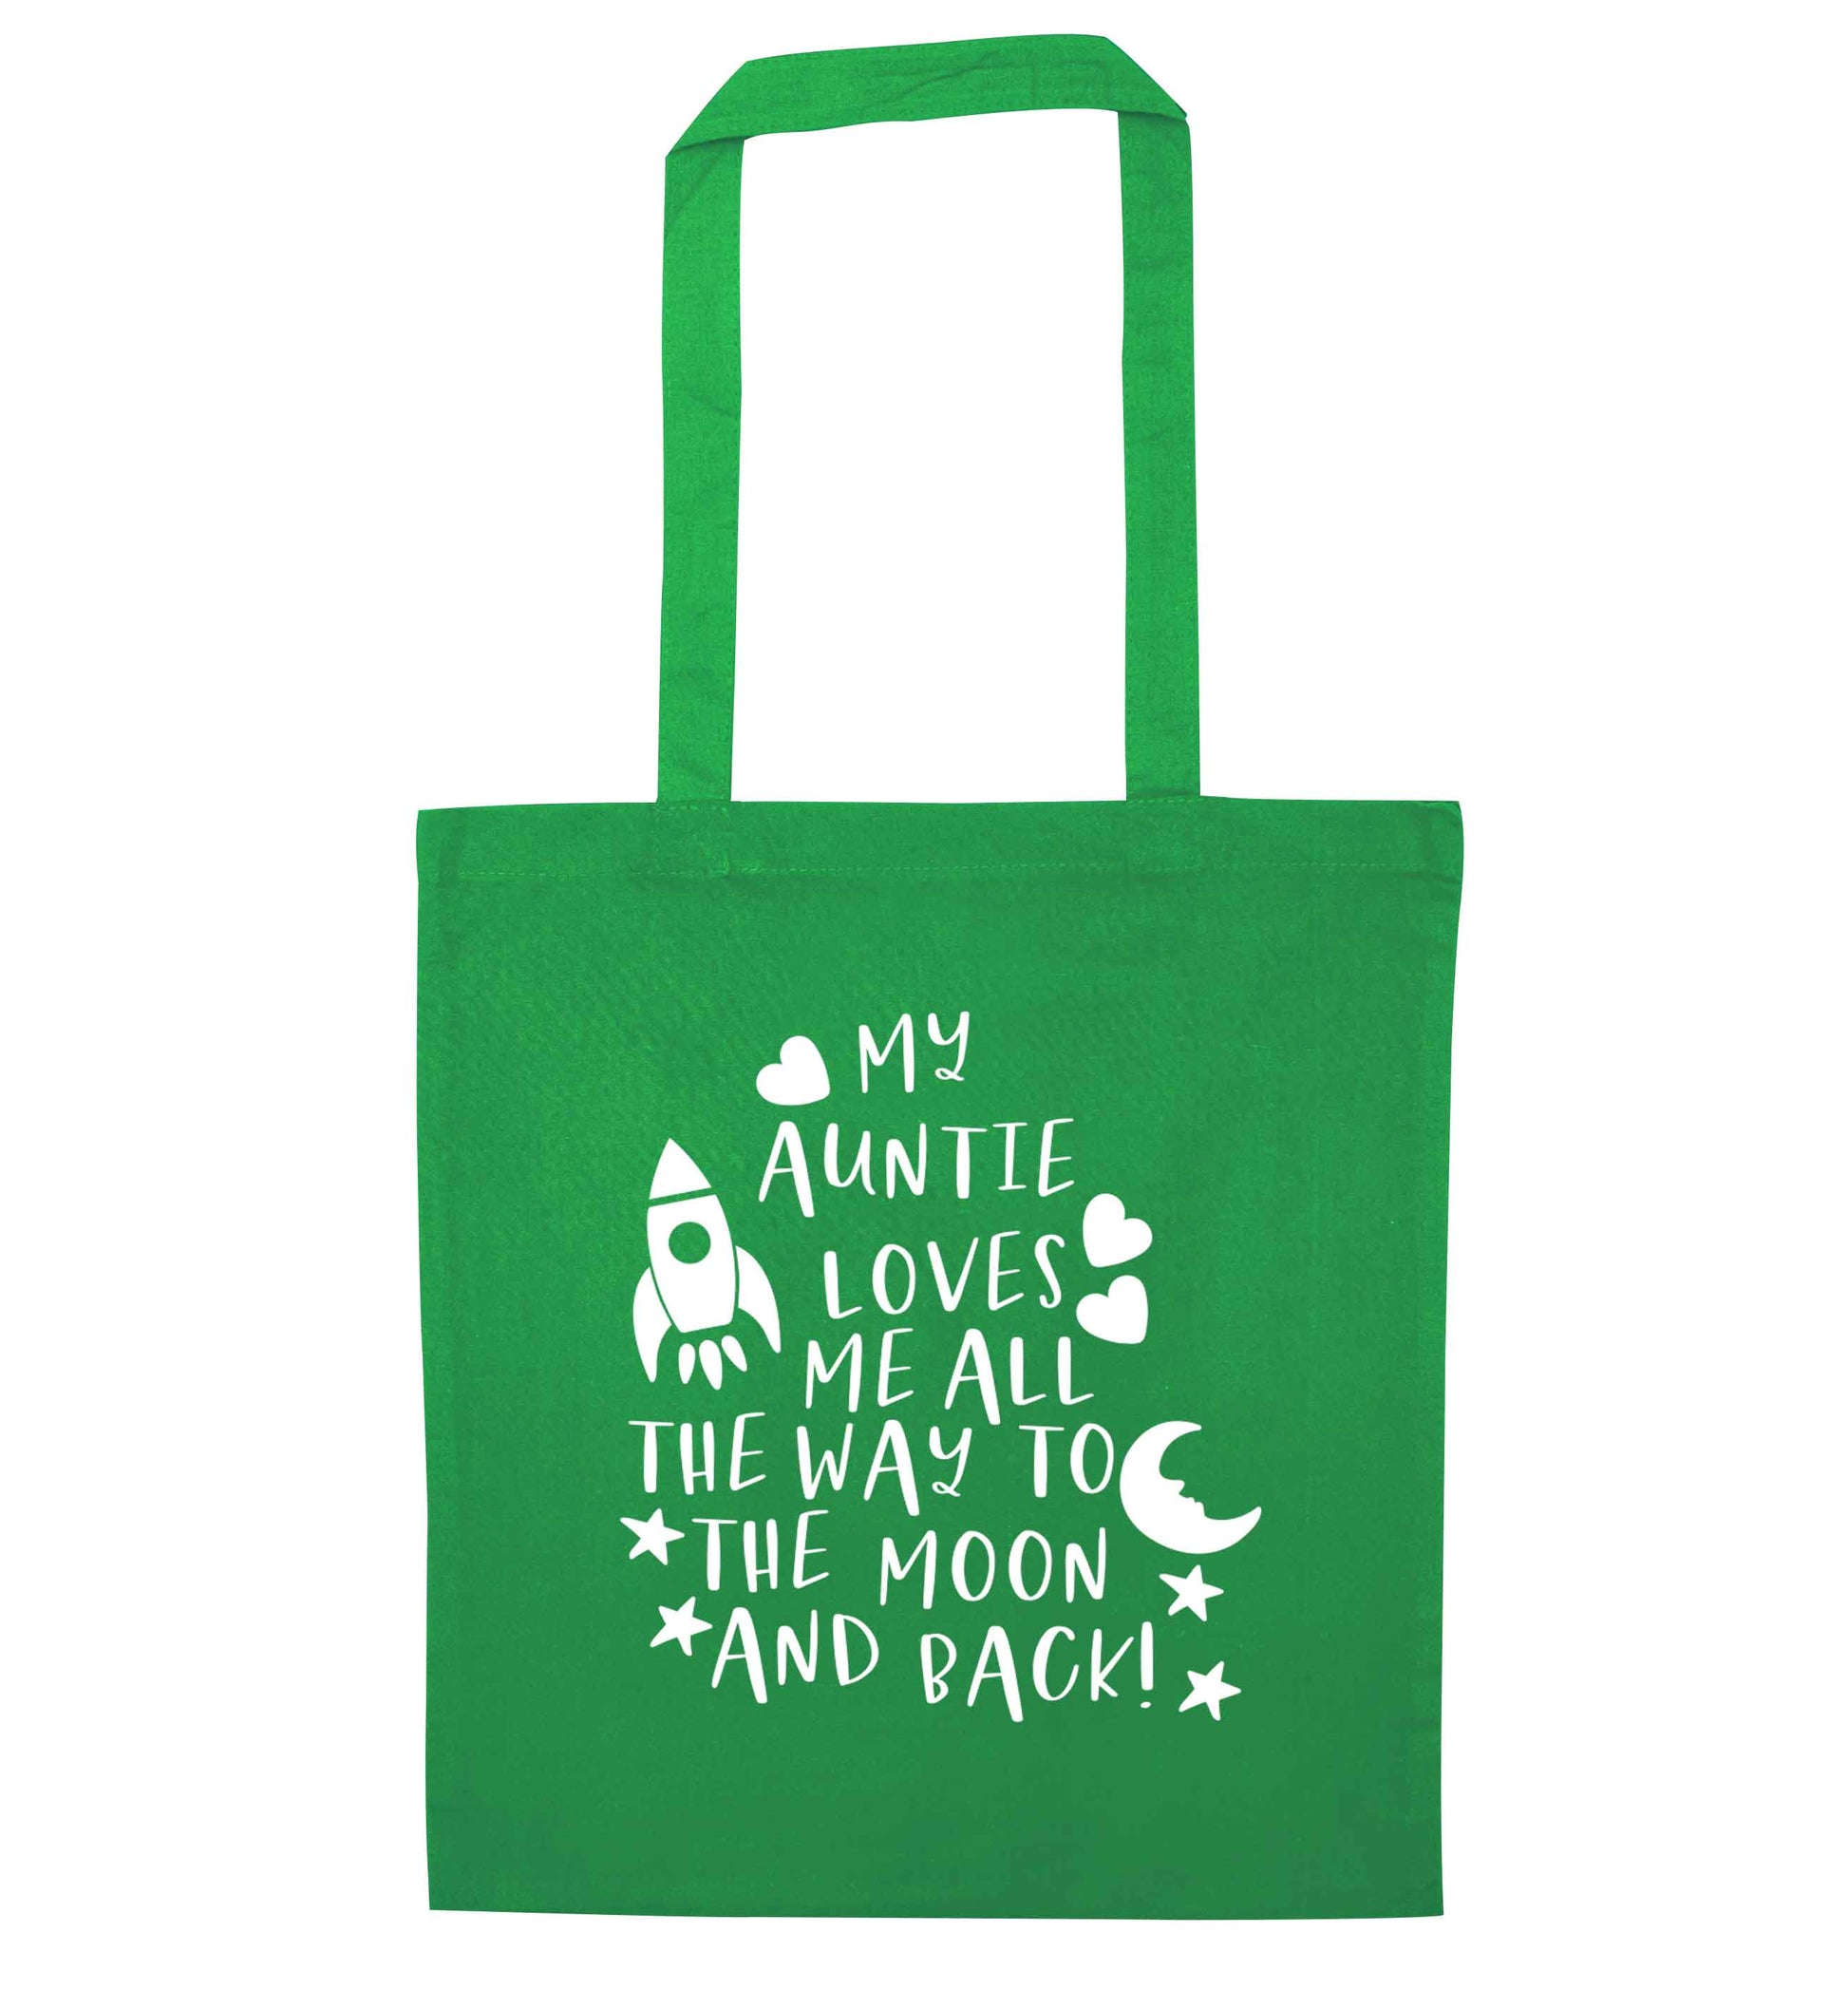 My auntie loves me all the way to the moon and back green tote bag